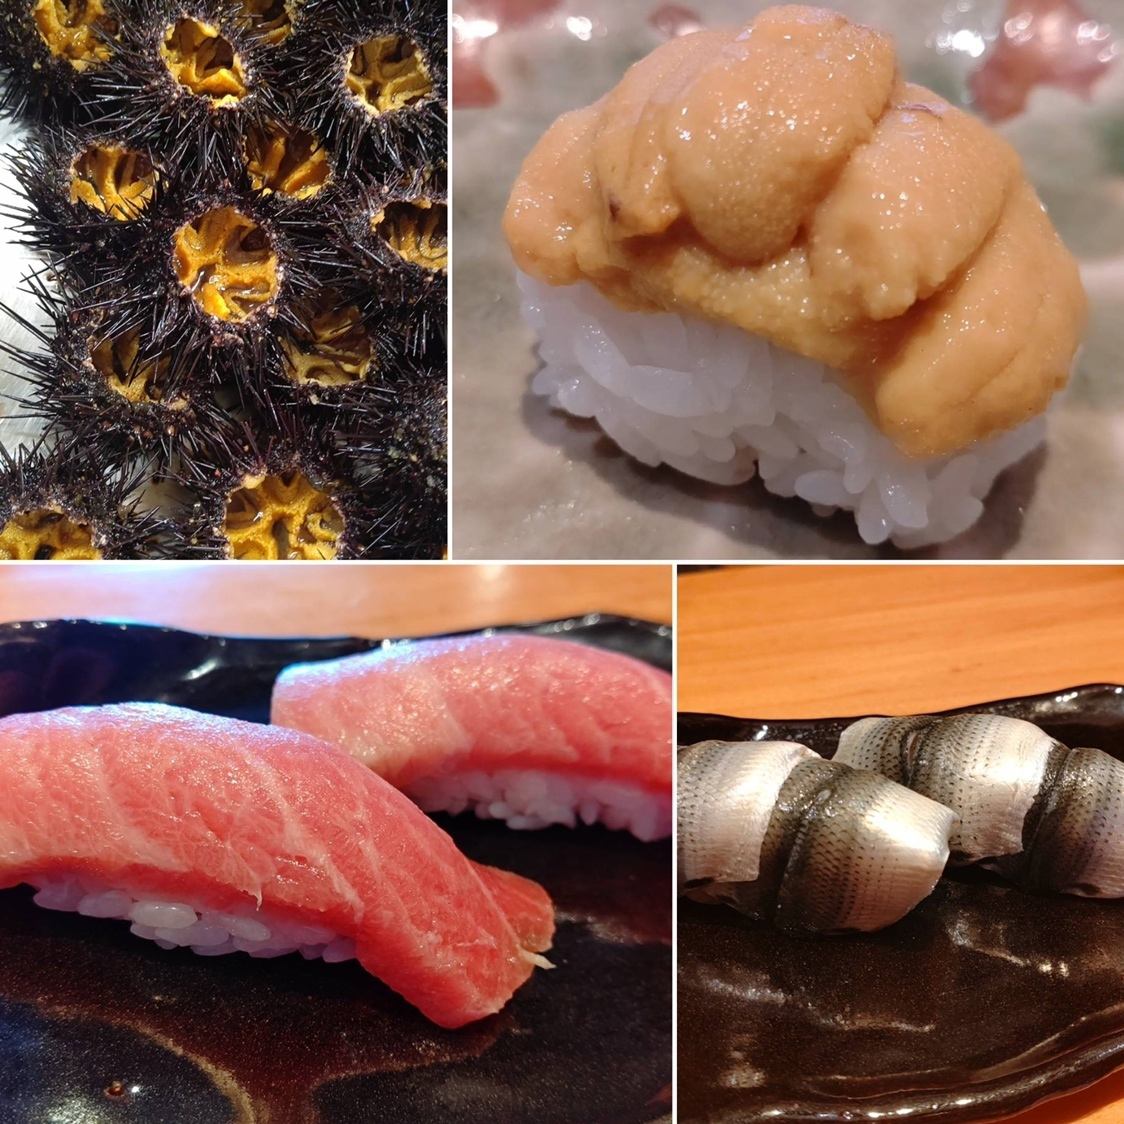 We offer a wide variety of fresh seafood from Sanriku.